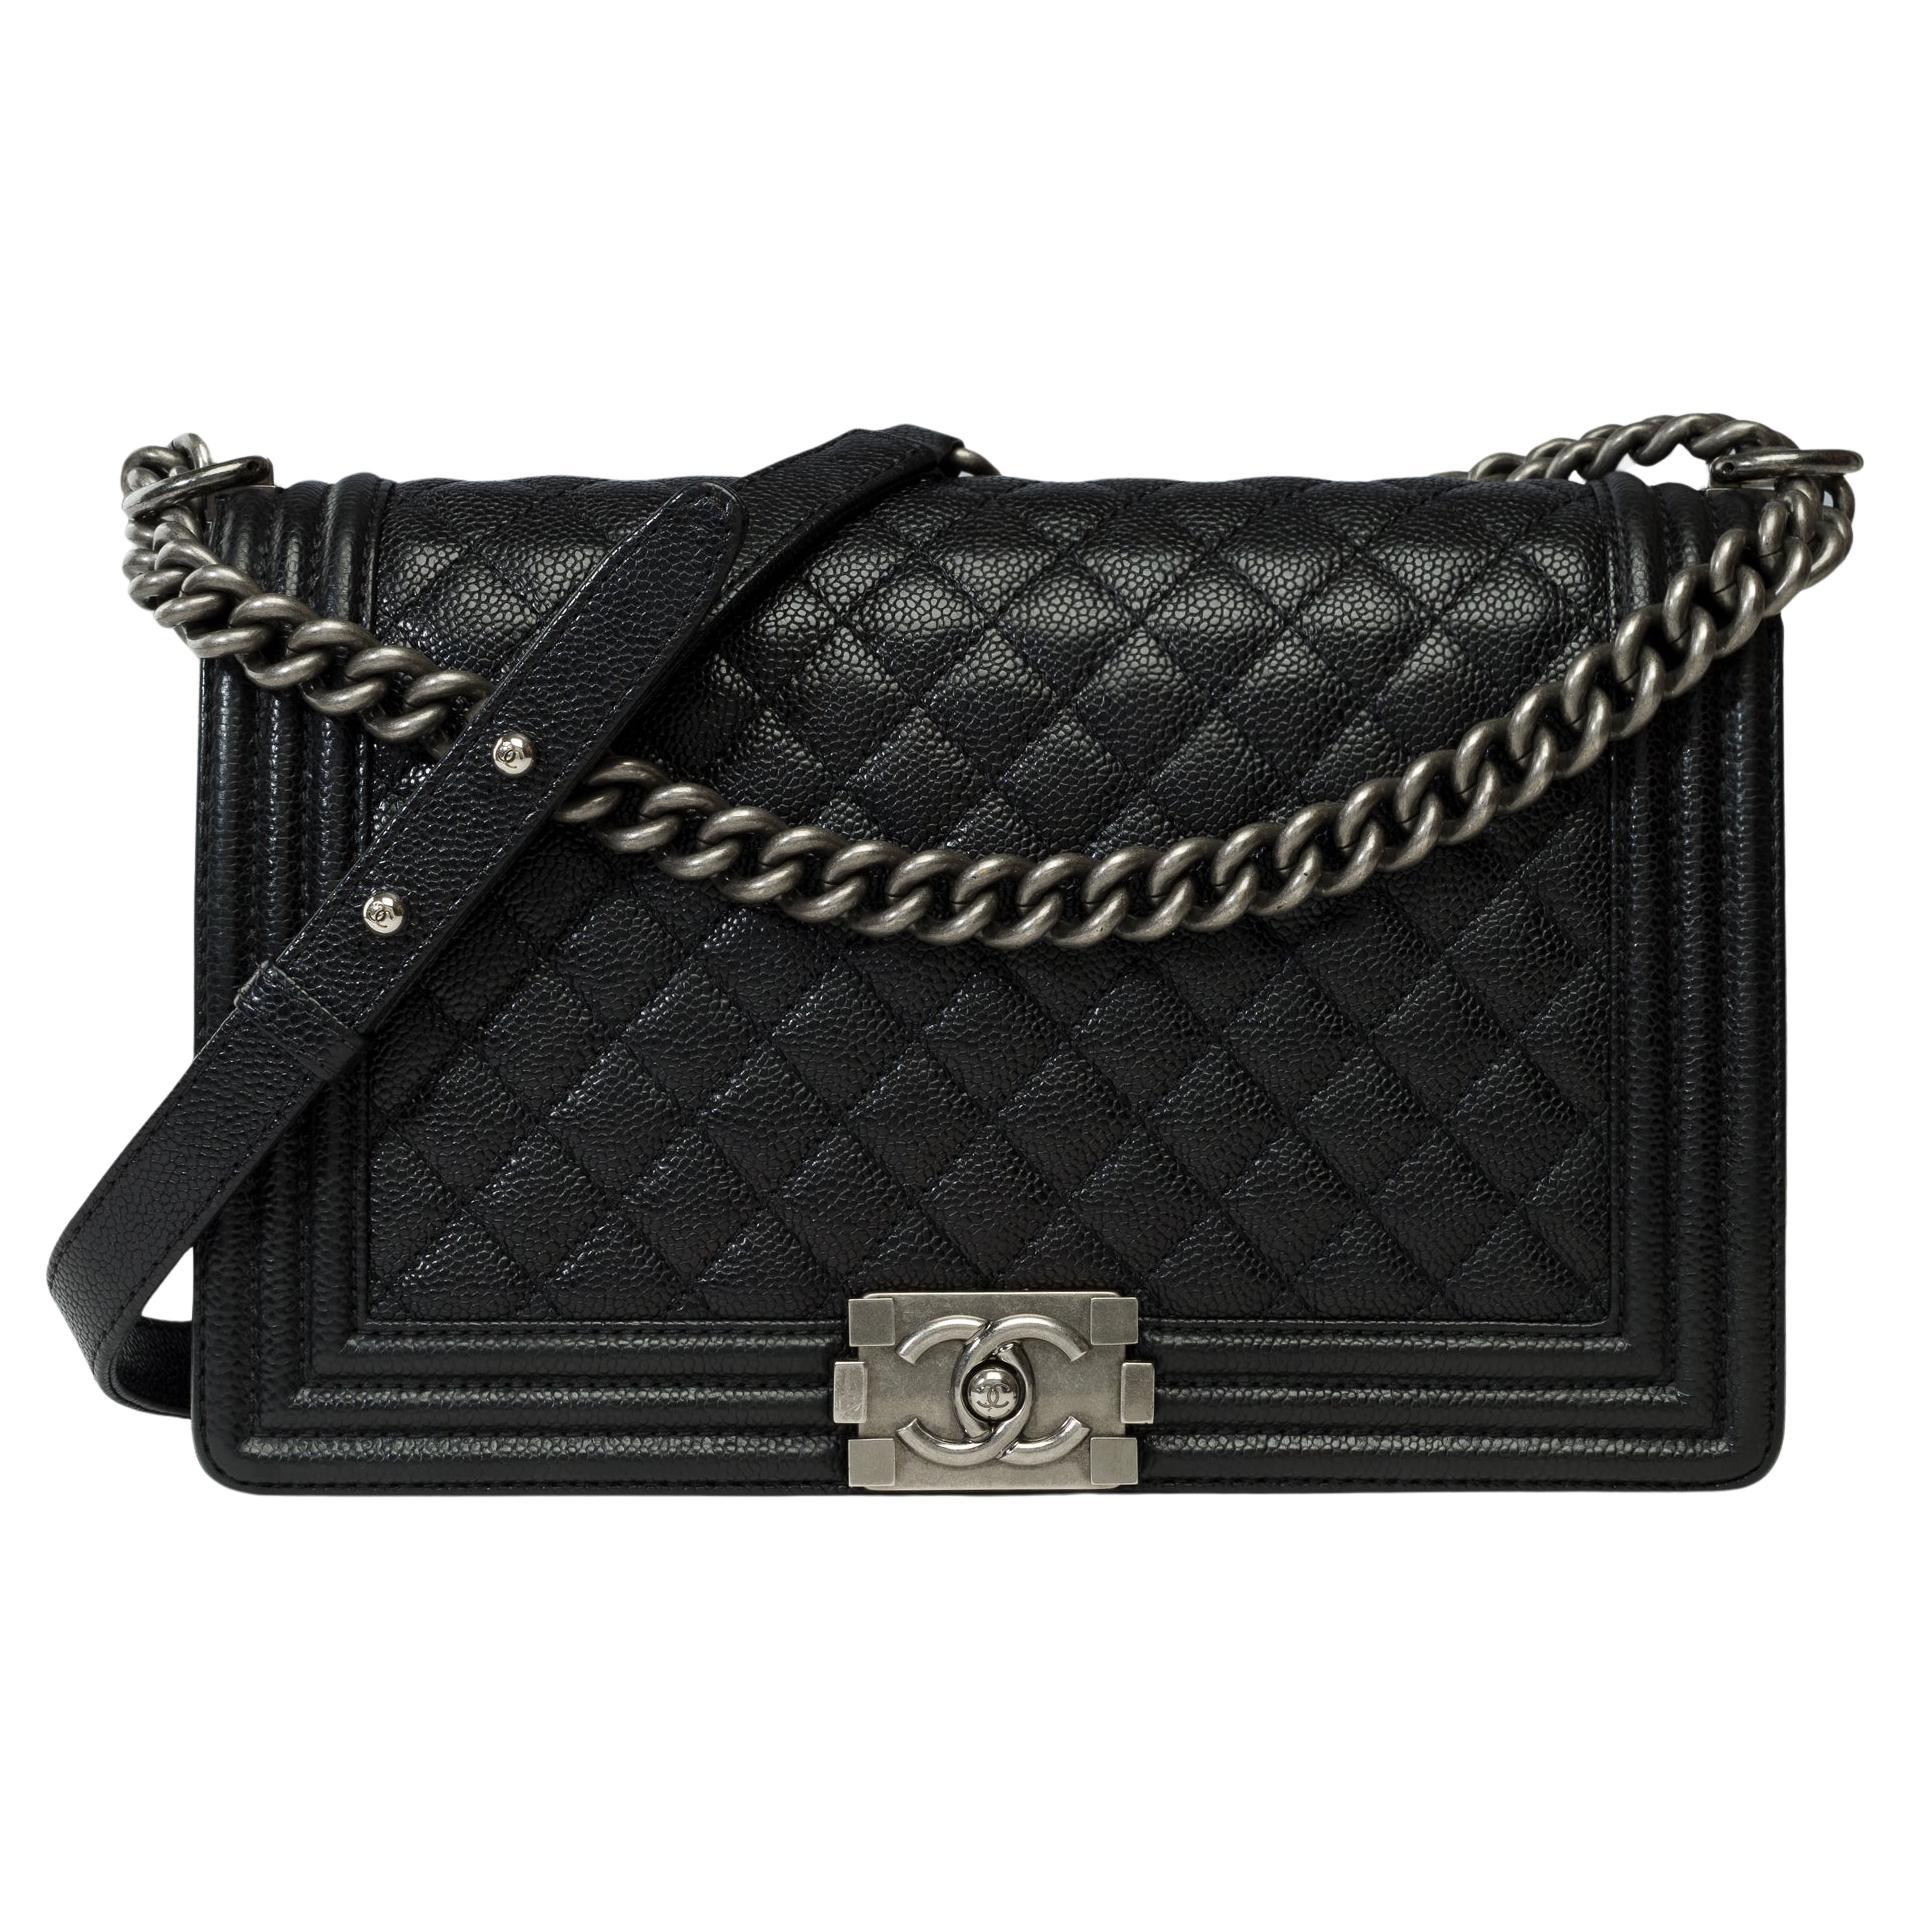 Chanel Boy New medium shoulder bag in black caviar quilted leather, SHW ! For Sale